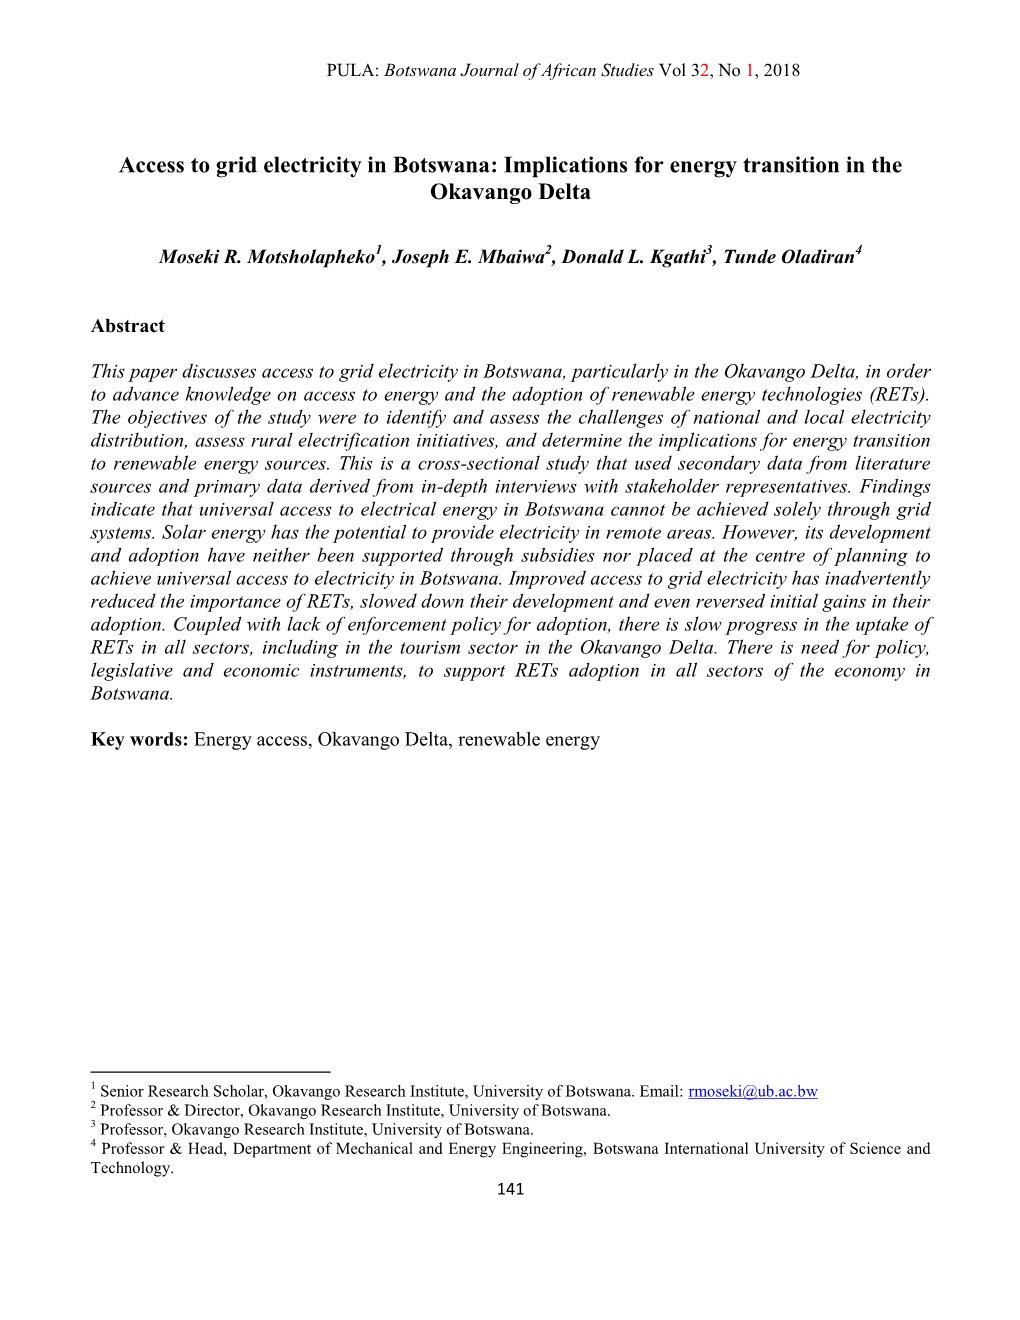 Access to Grid Electricity in Botswana: Implications for Energy Transition in the Okavango Delta